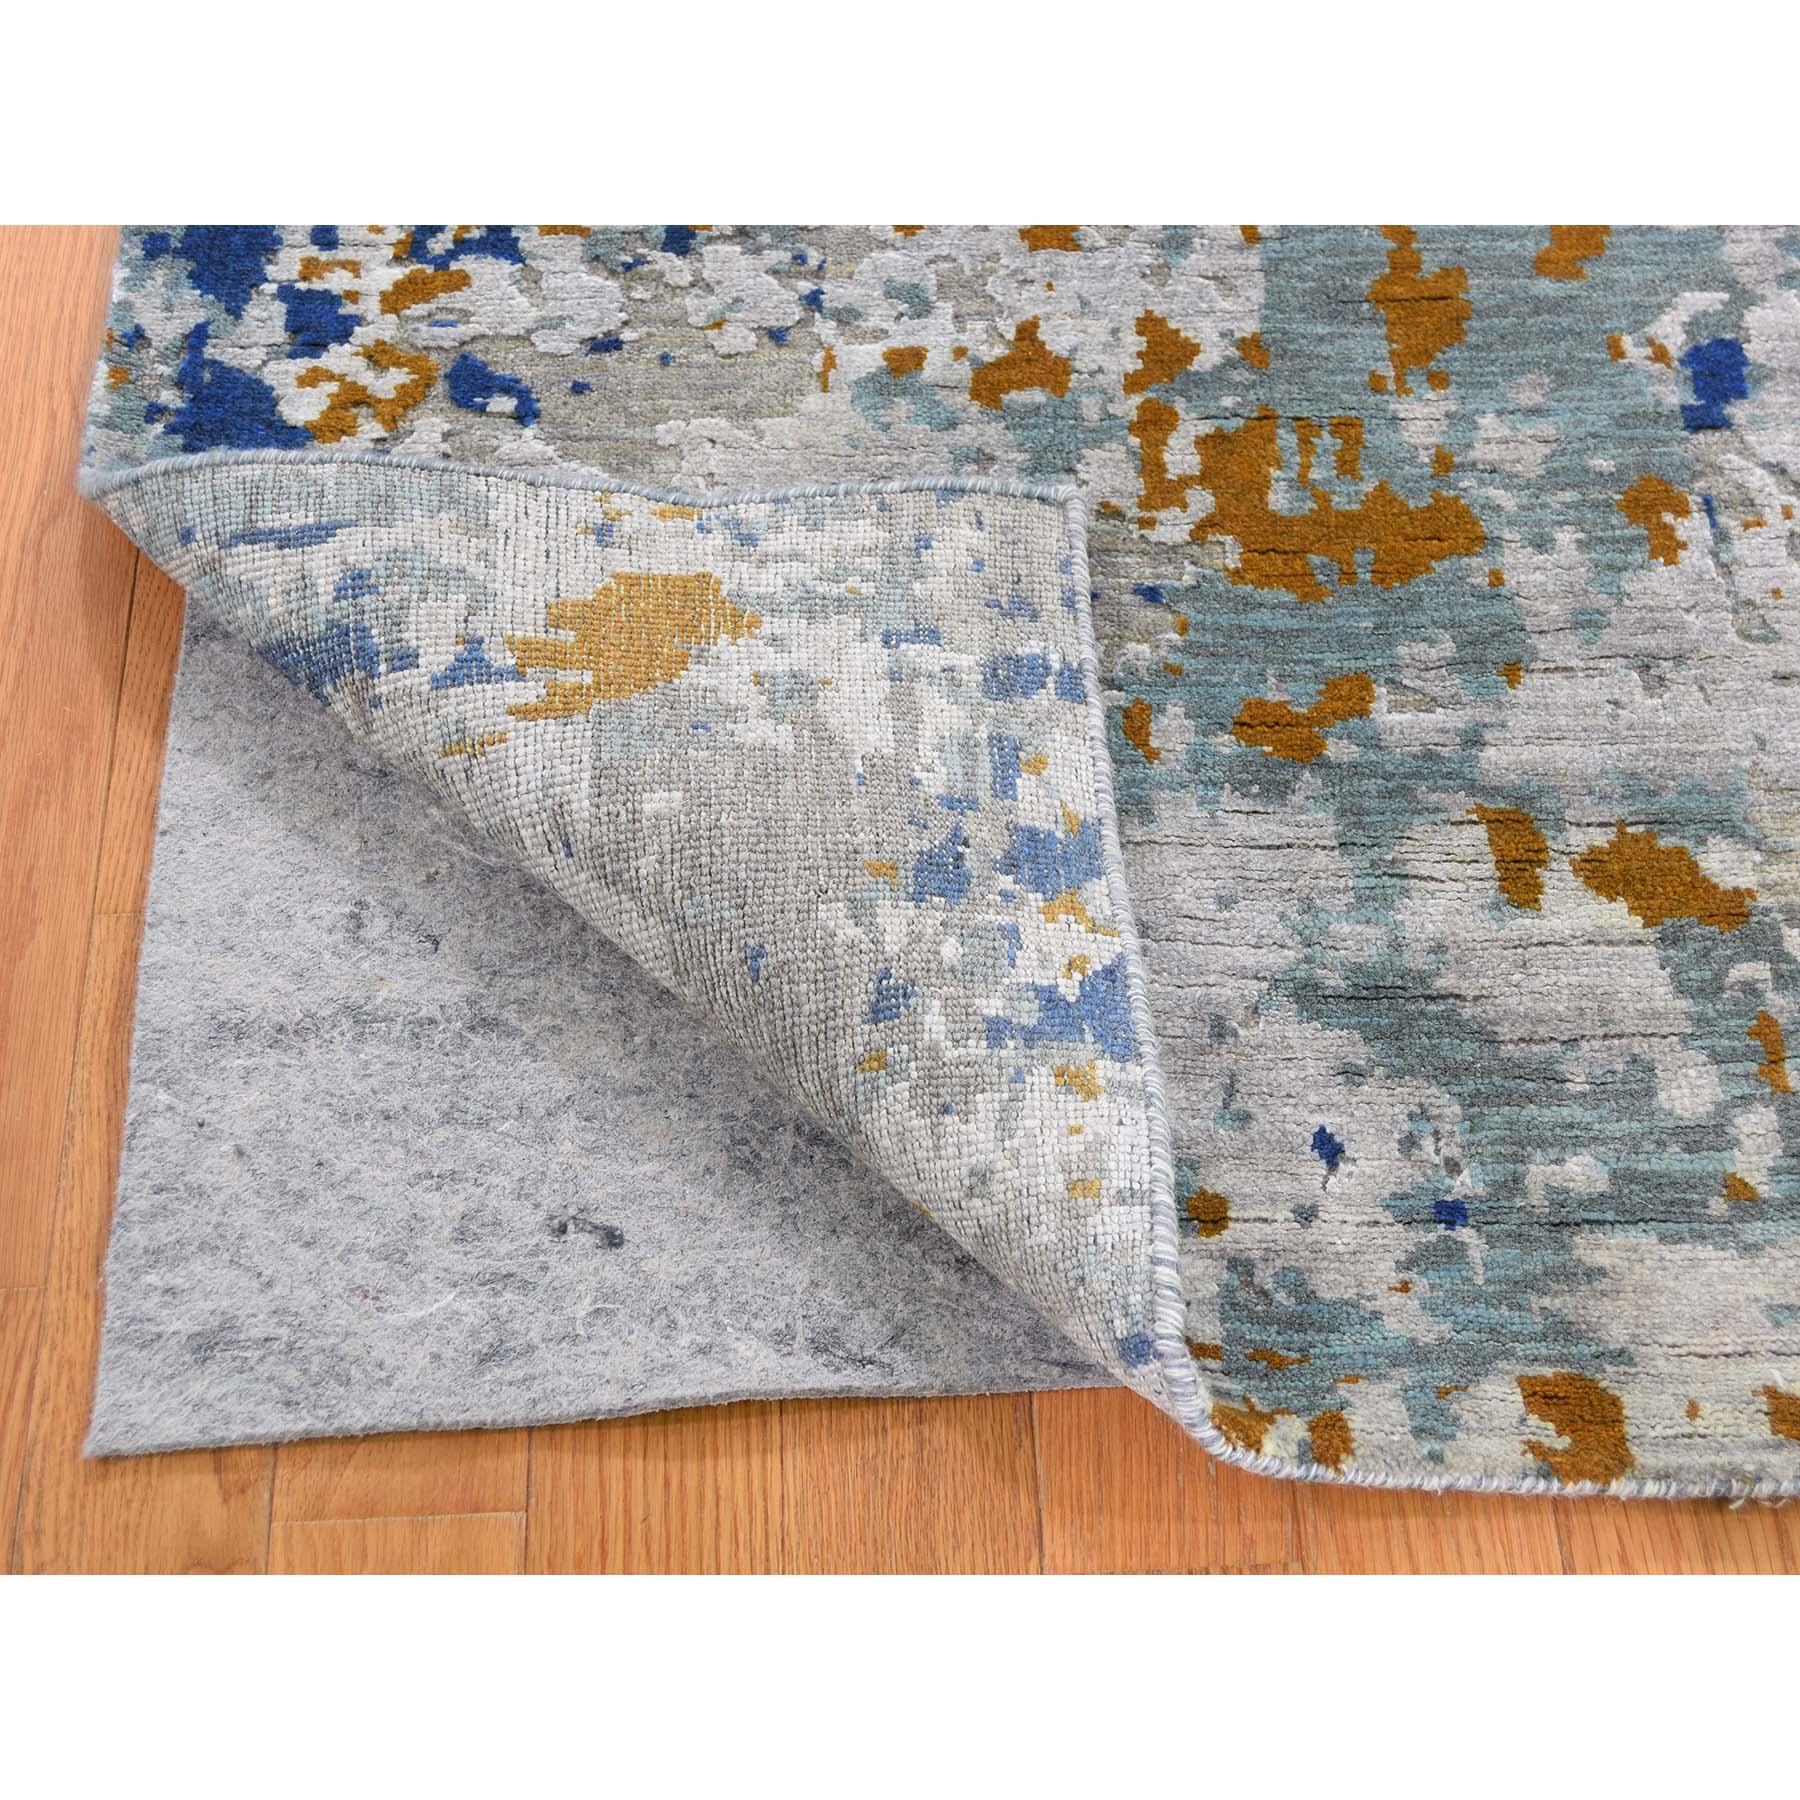 3-x5-1  Abstract Design Wool And Silk Hi-Low Pile Hand-Knotted Oriental Rug 